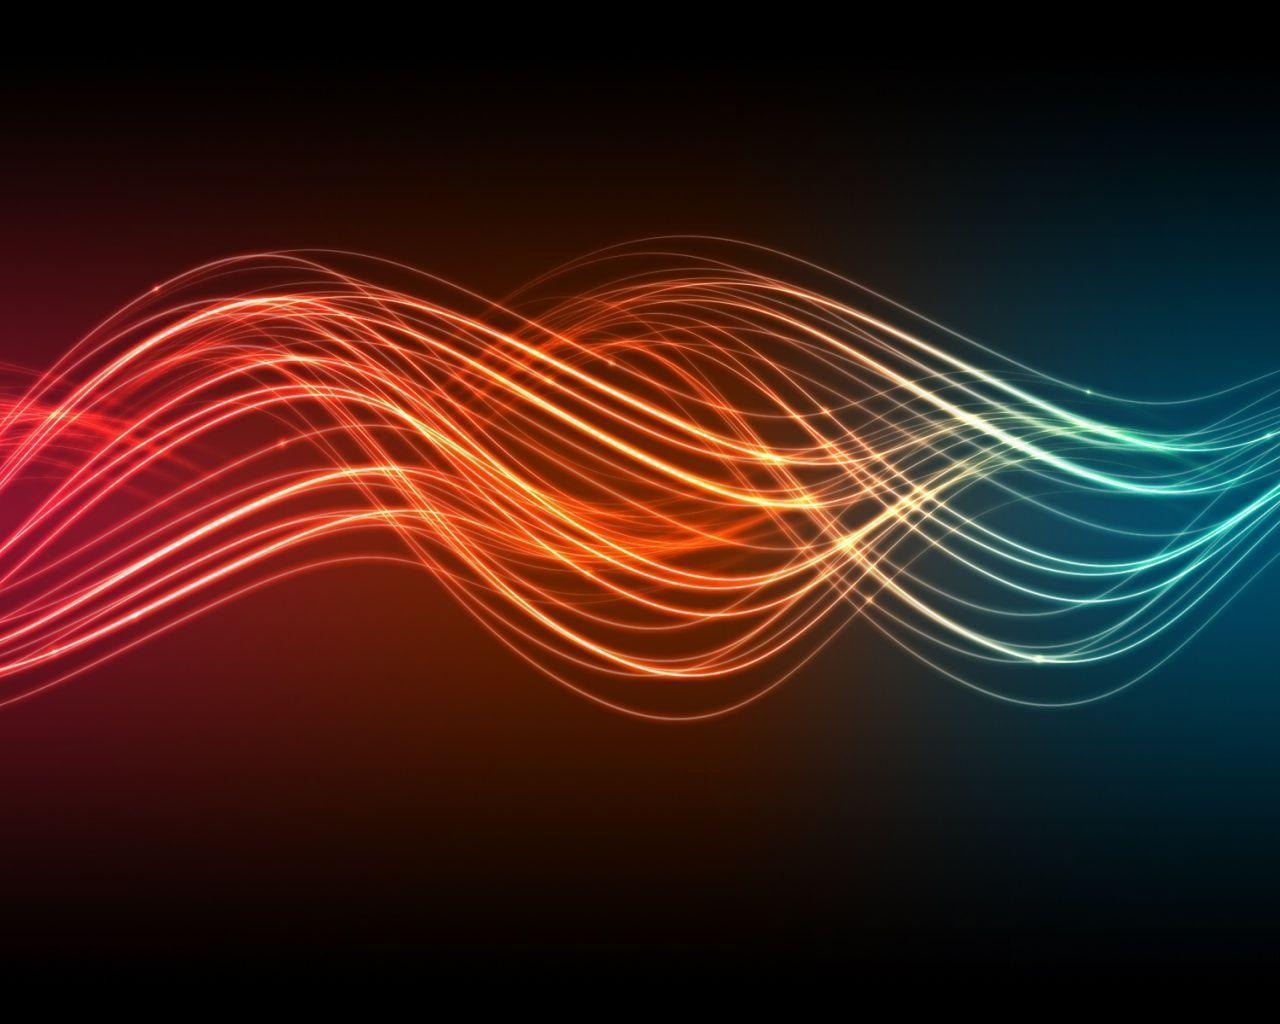 Cool Sound Wave Background. Best Reviews About Audio And Gadgets